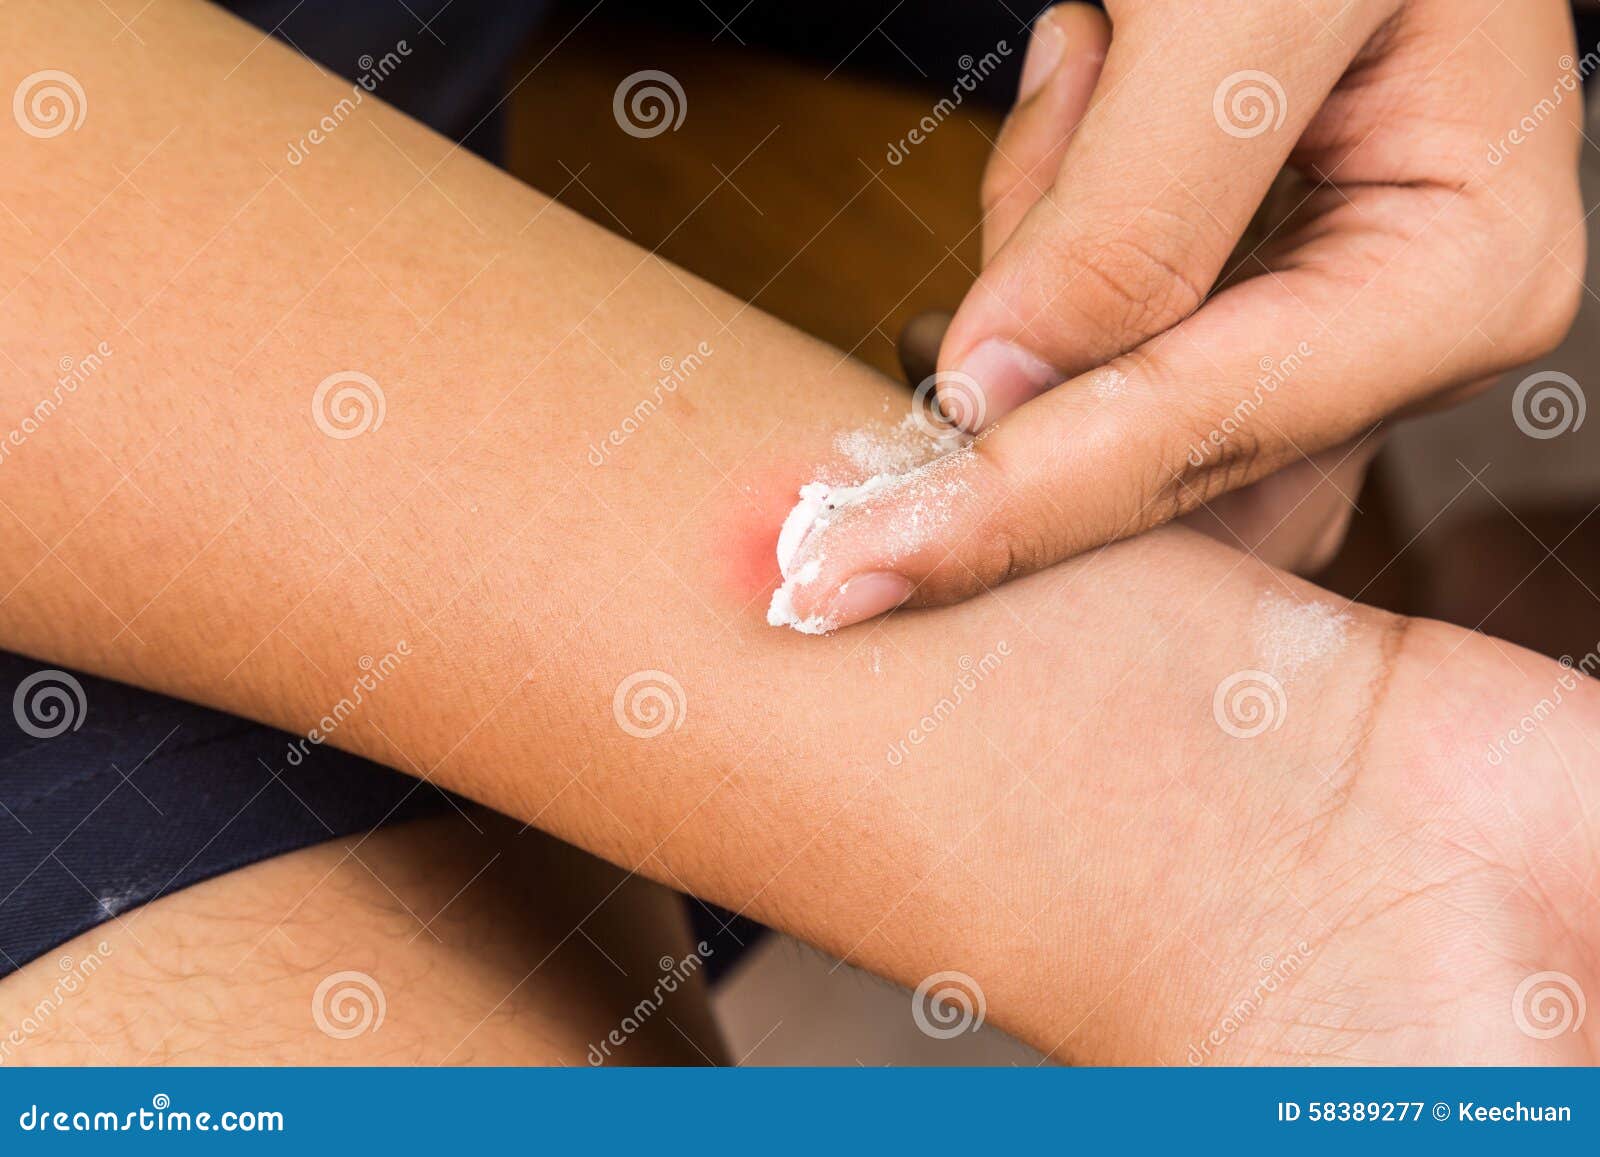 baking soda being used to relieve itching from insect bites.